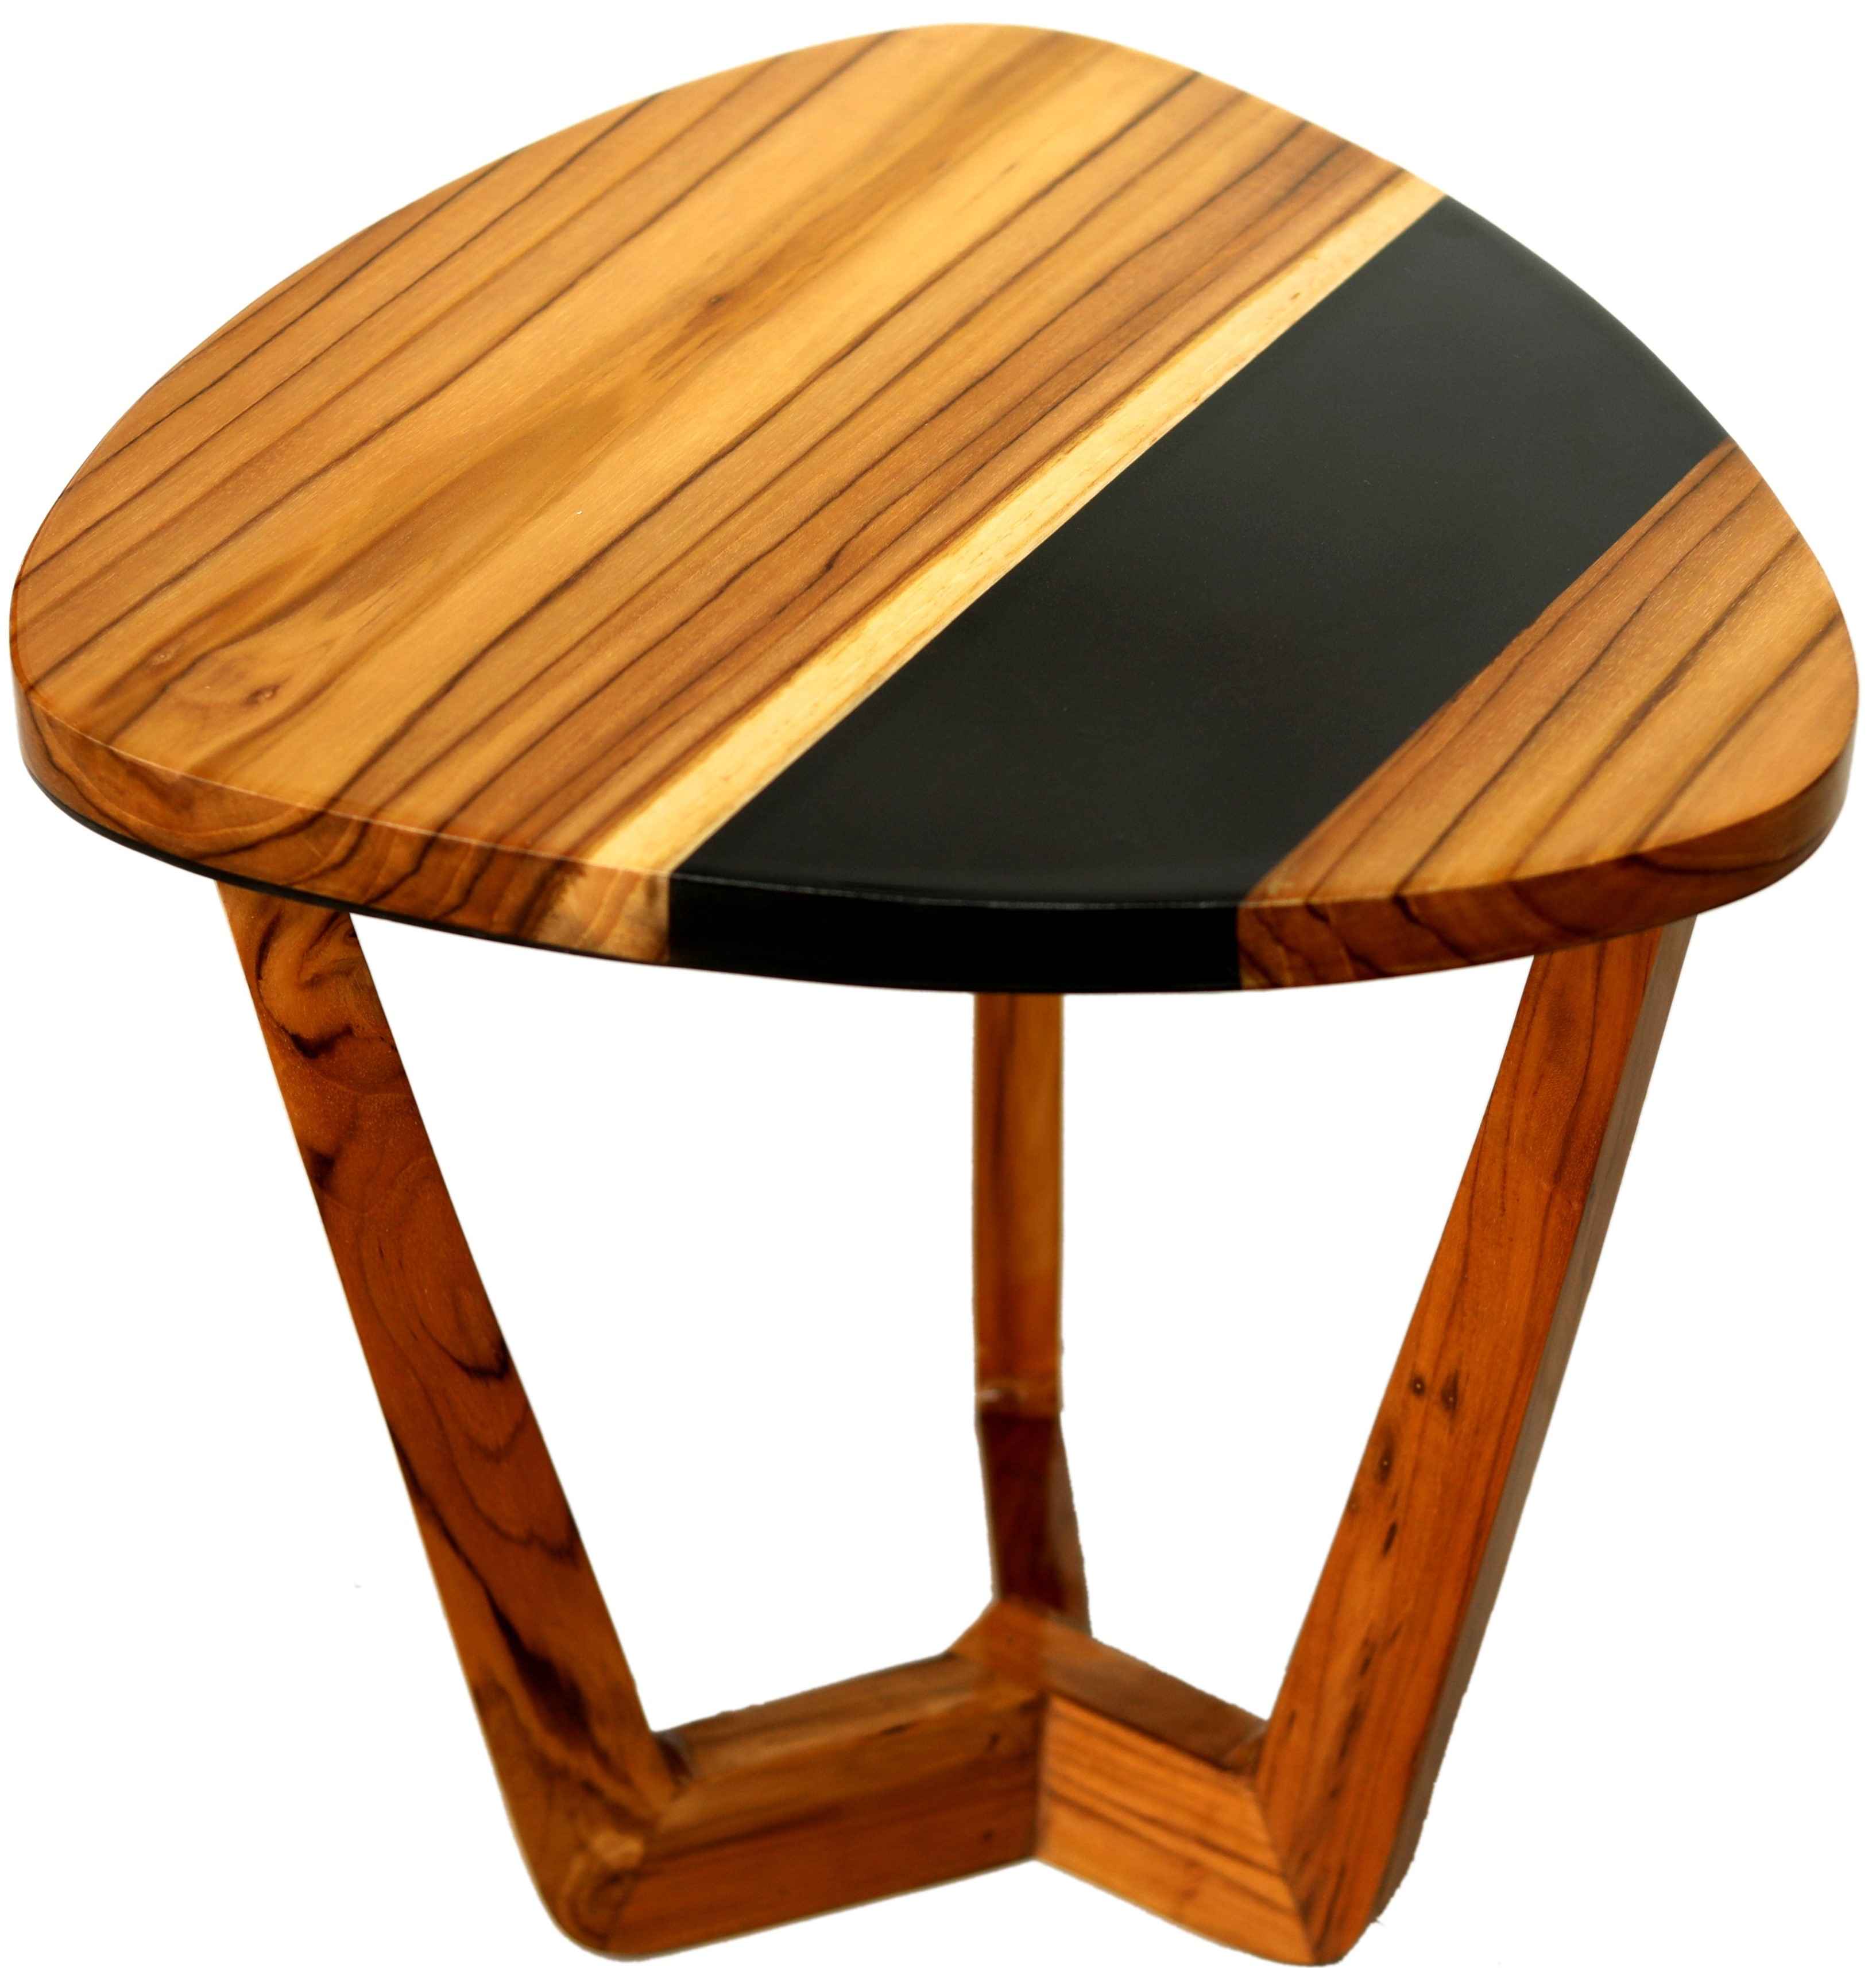 Mika Side Table